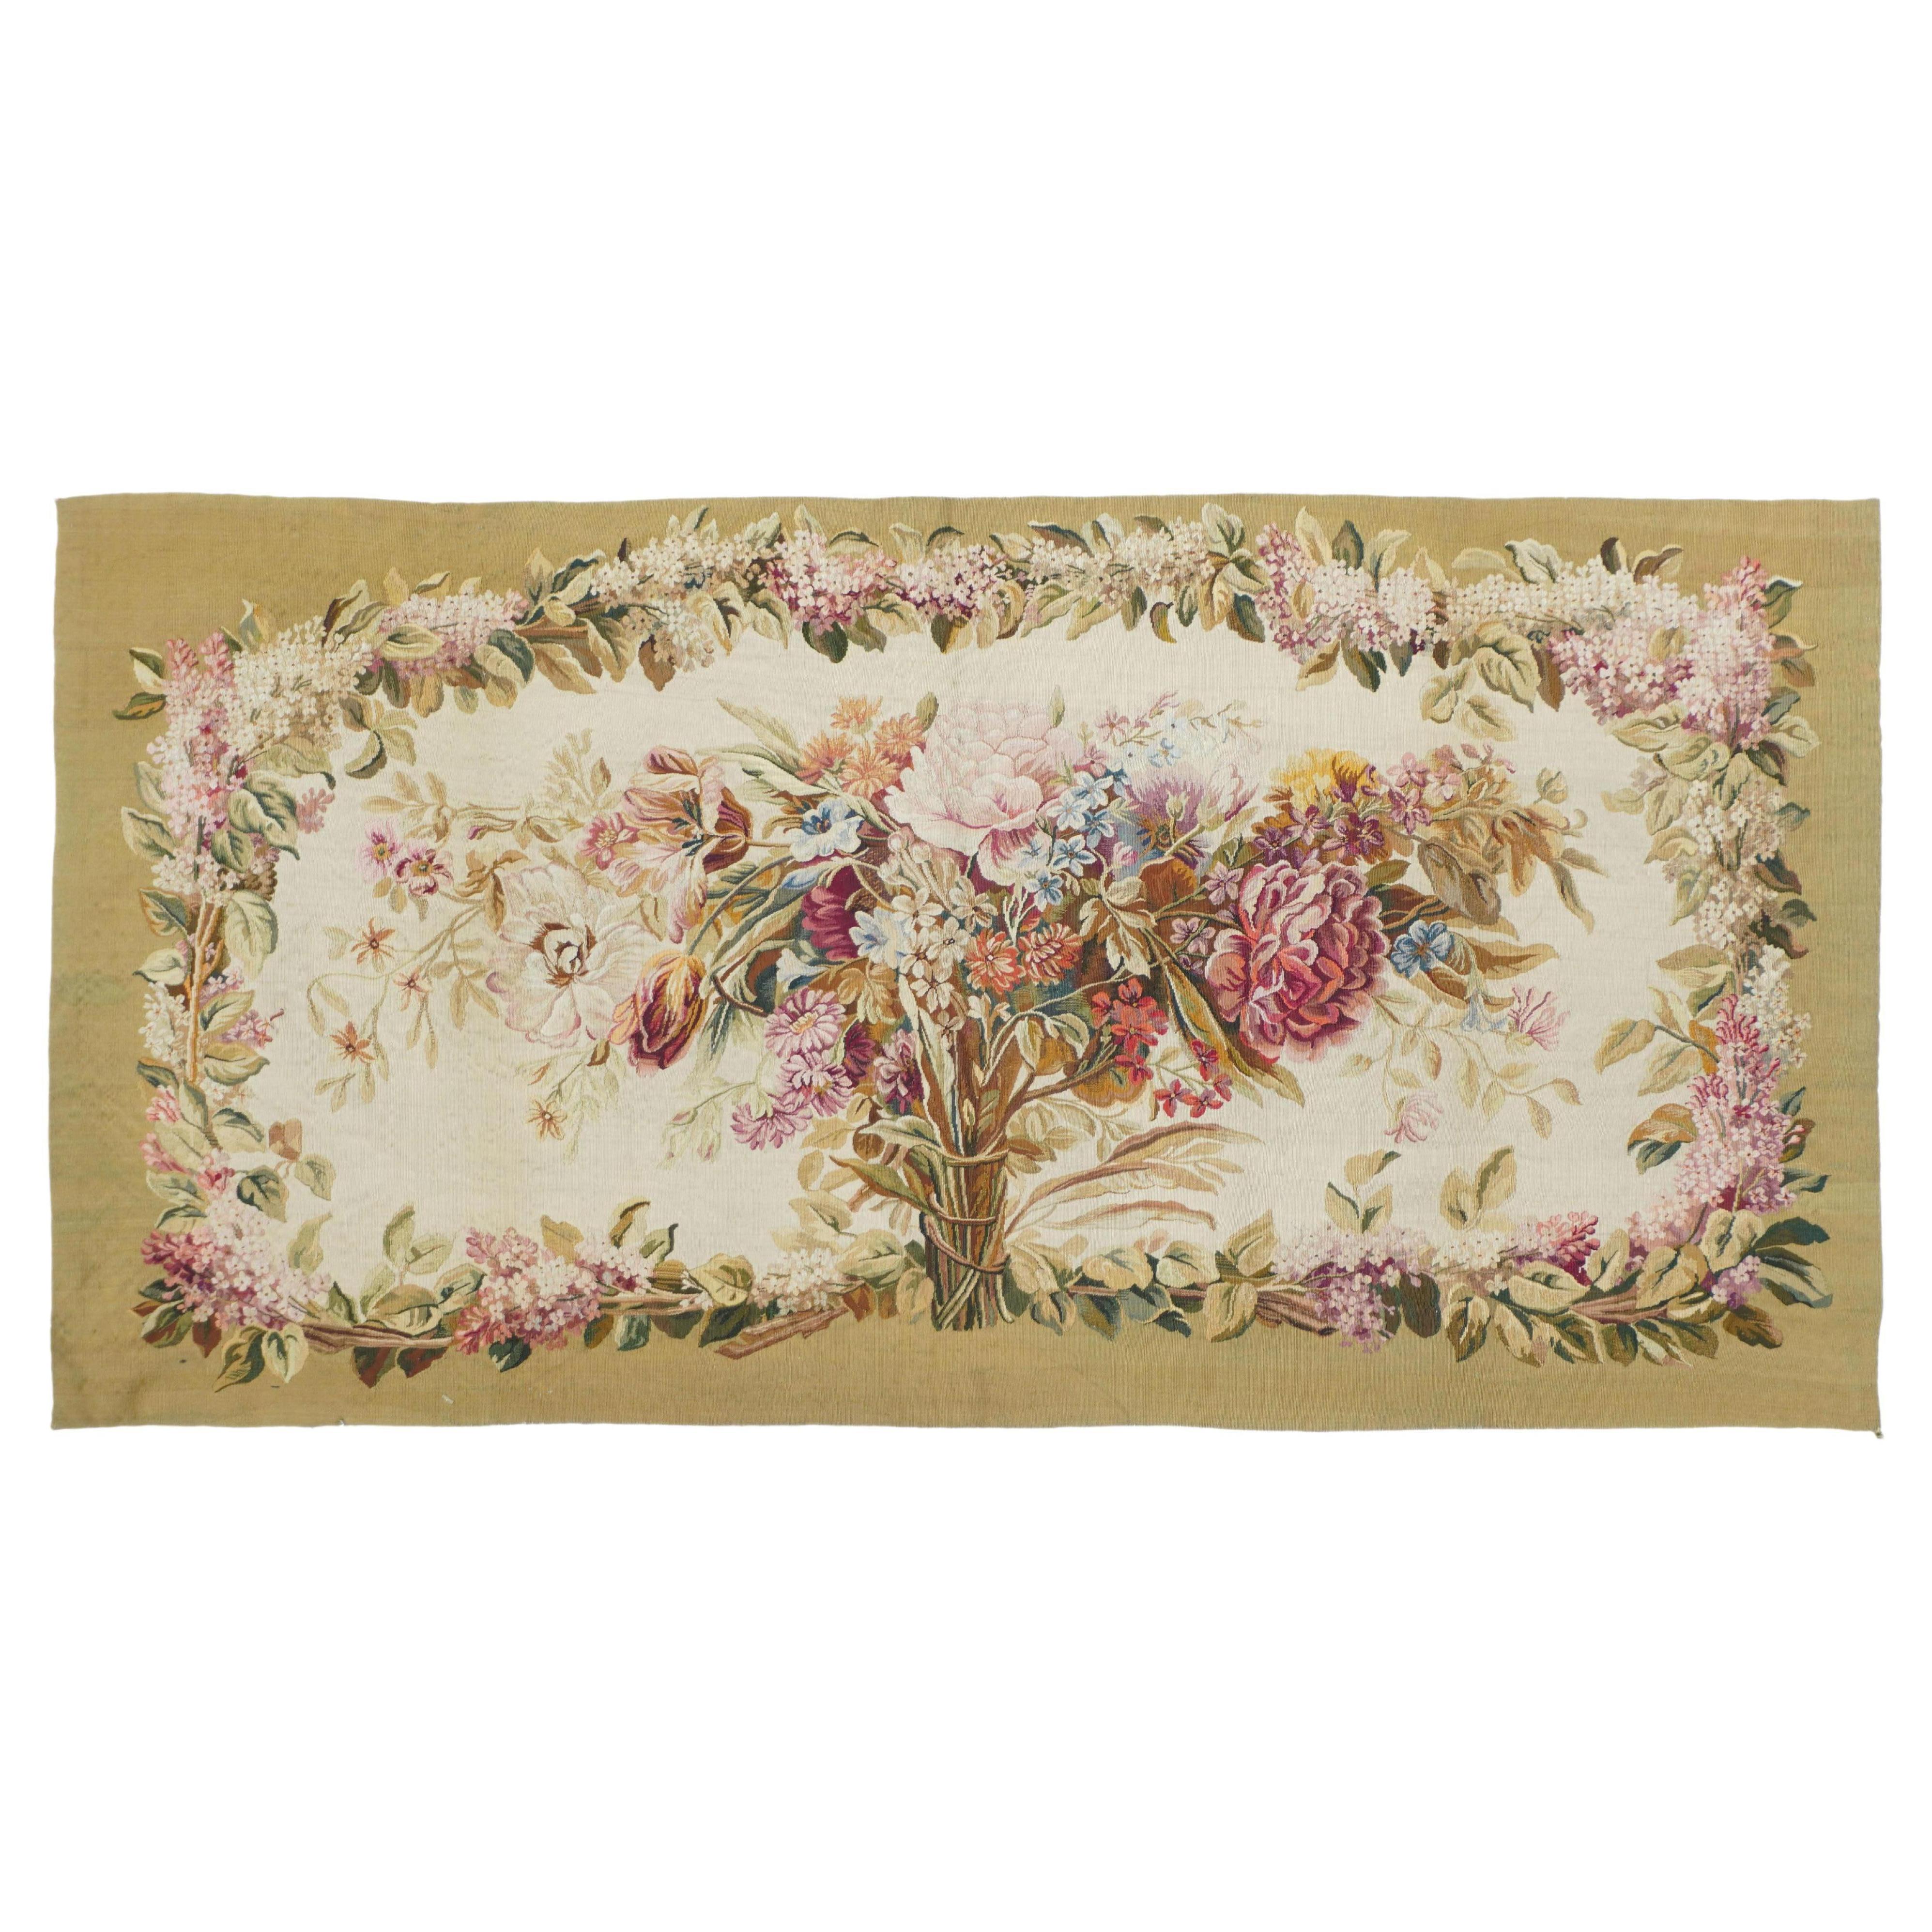 Antique Aubusson-Beauvais French Tapestry Rug 2'2'' x 4'6''